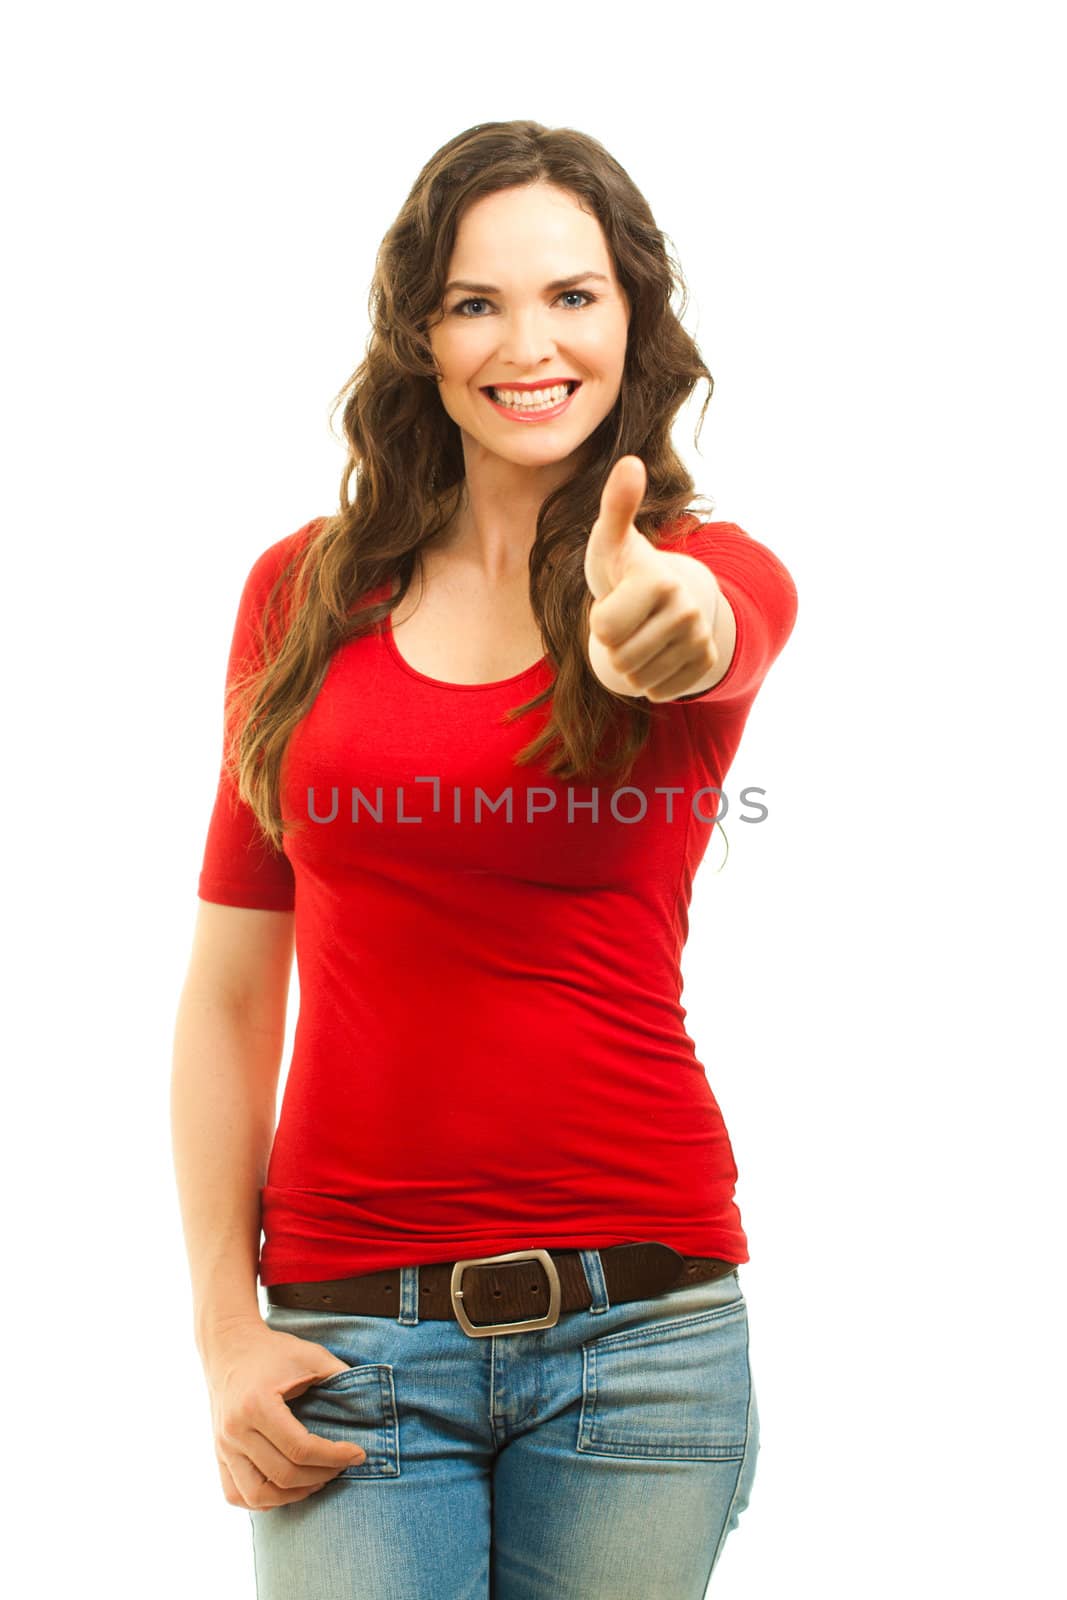 Beautiful young woman wearing a bright red top giving thumbs up